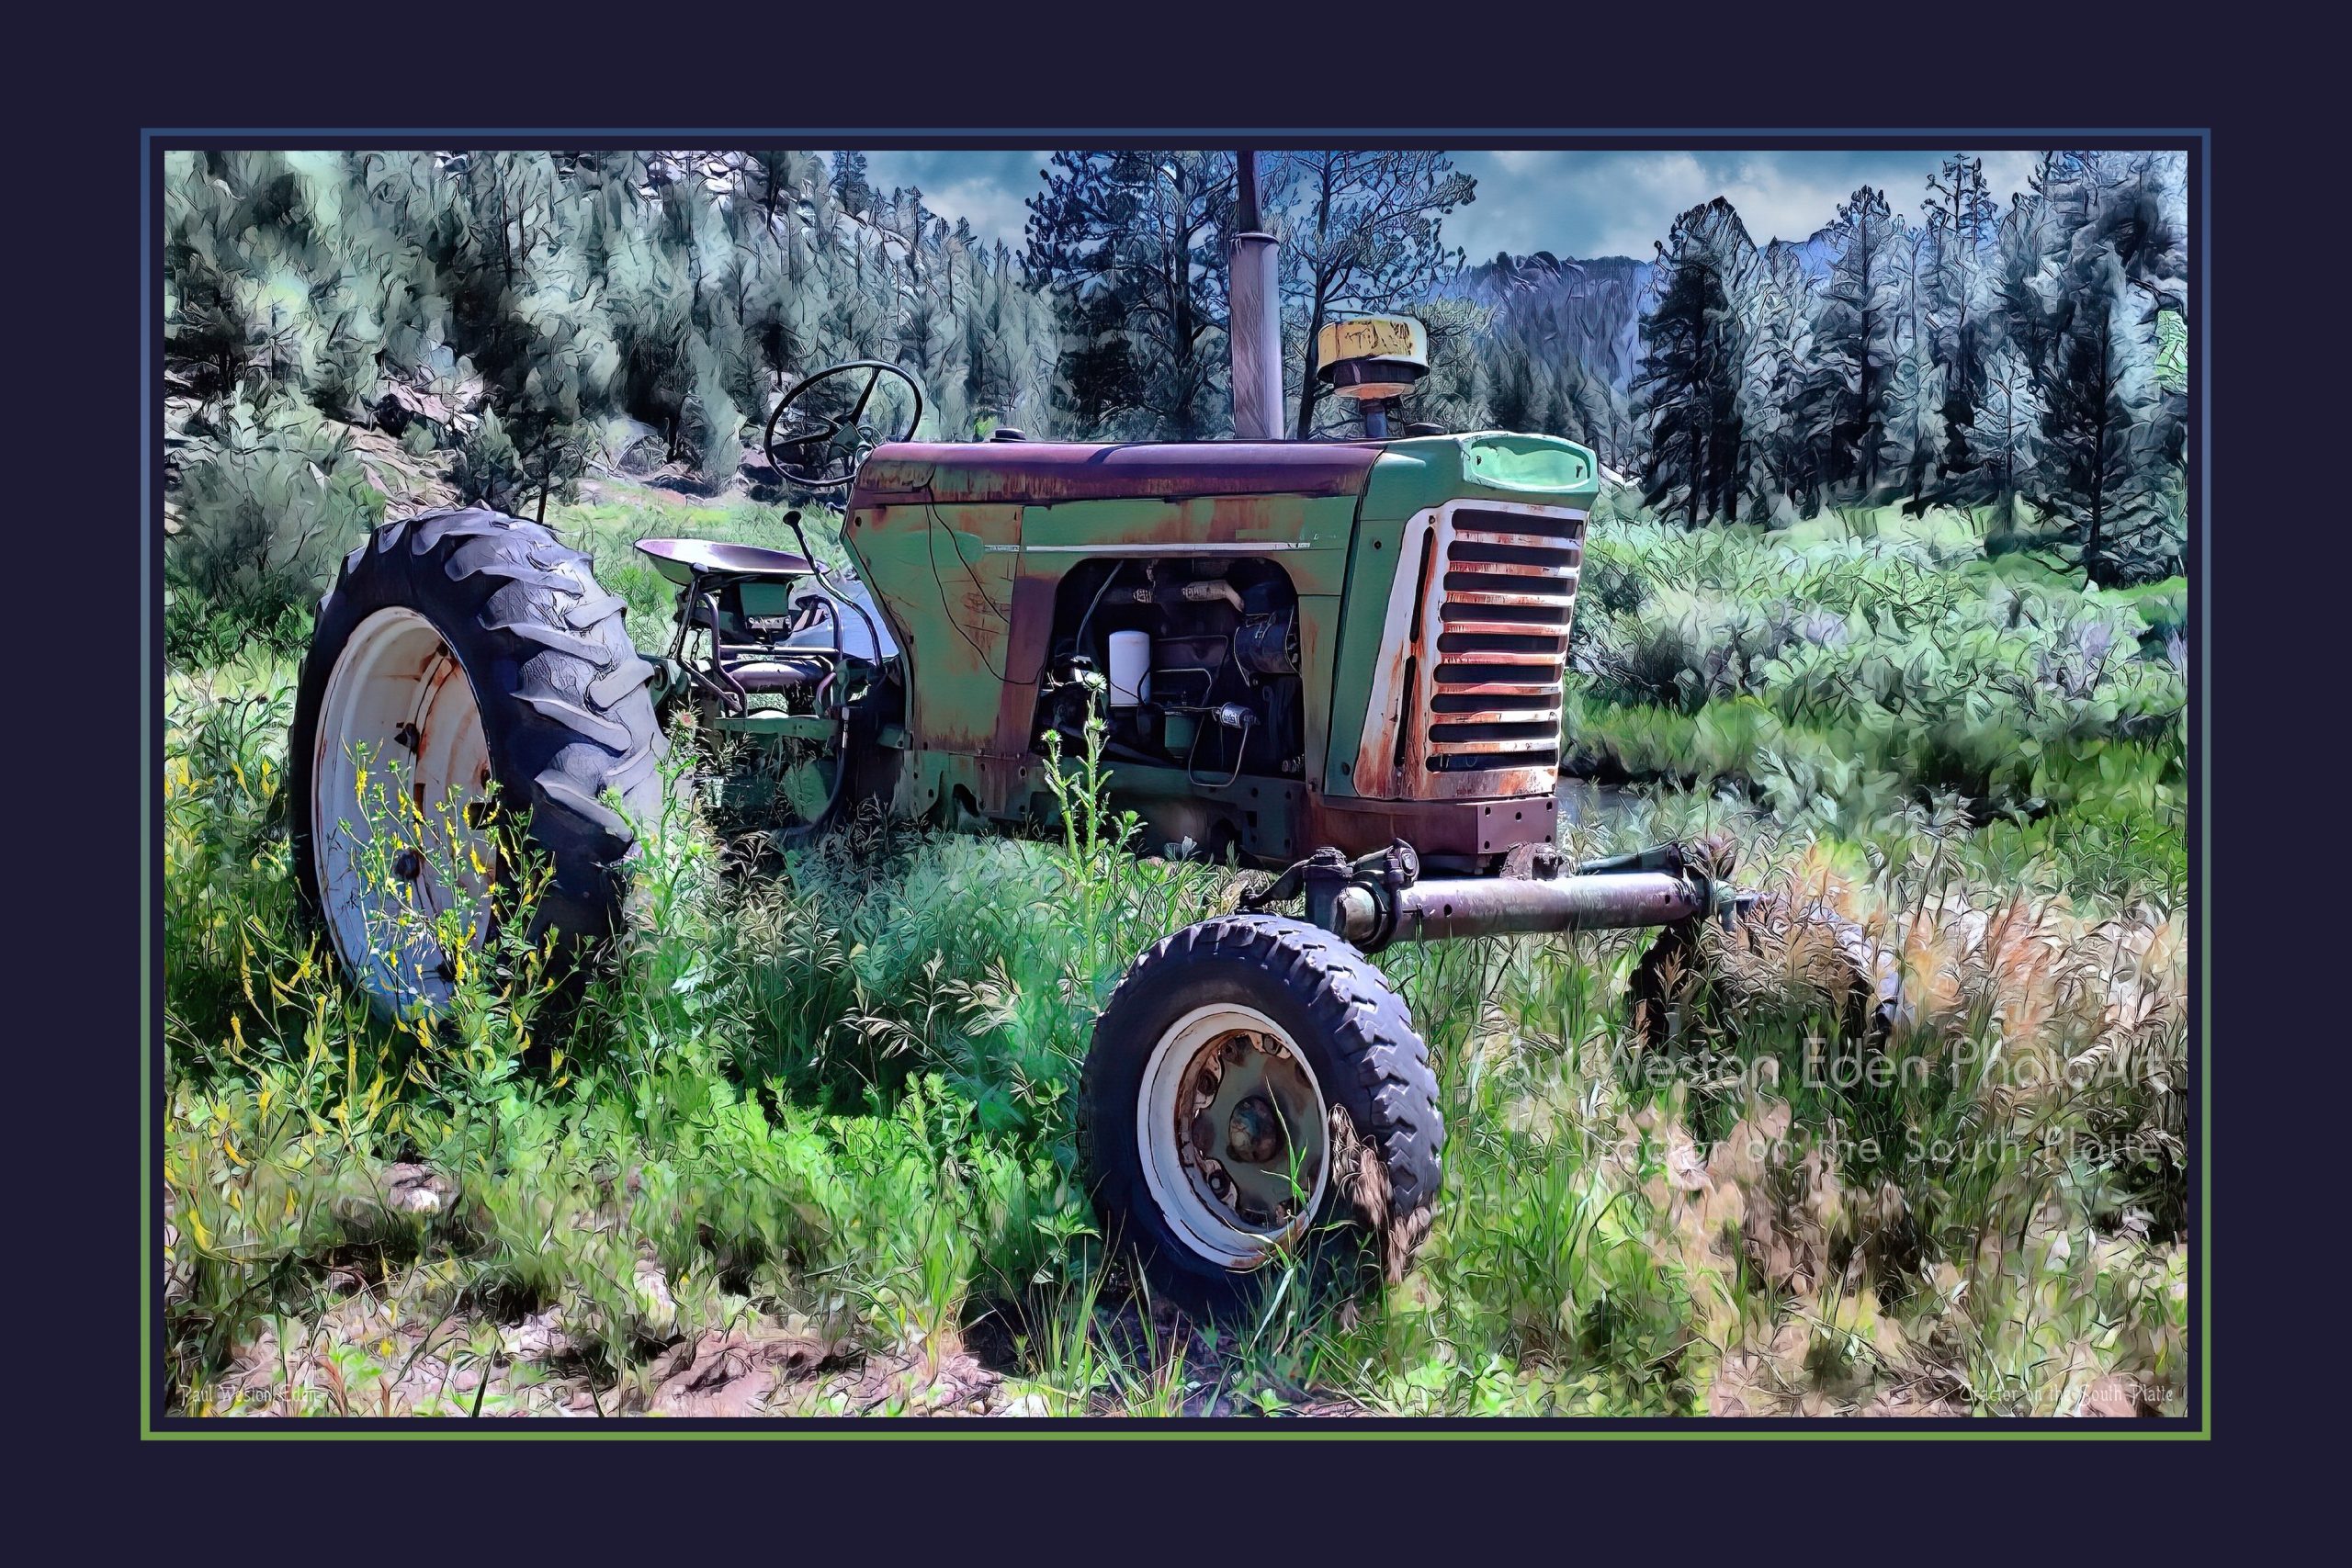 Tractor on the South Platte